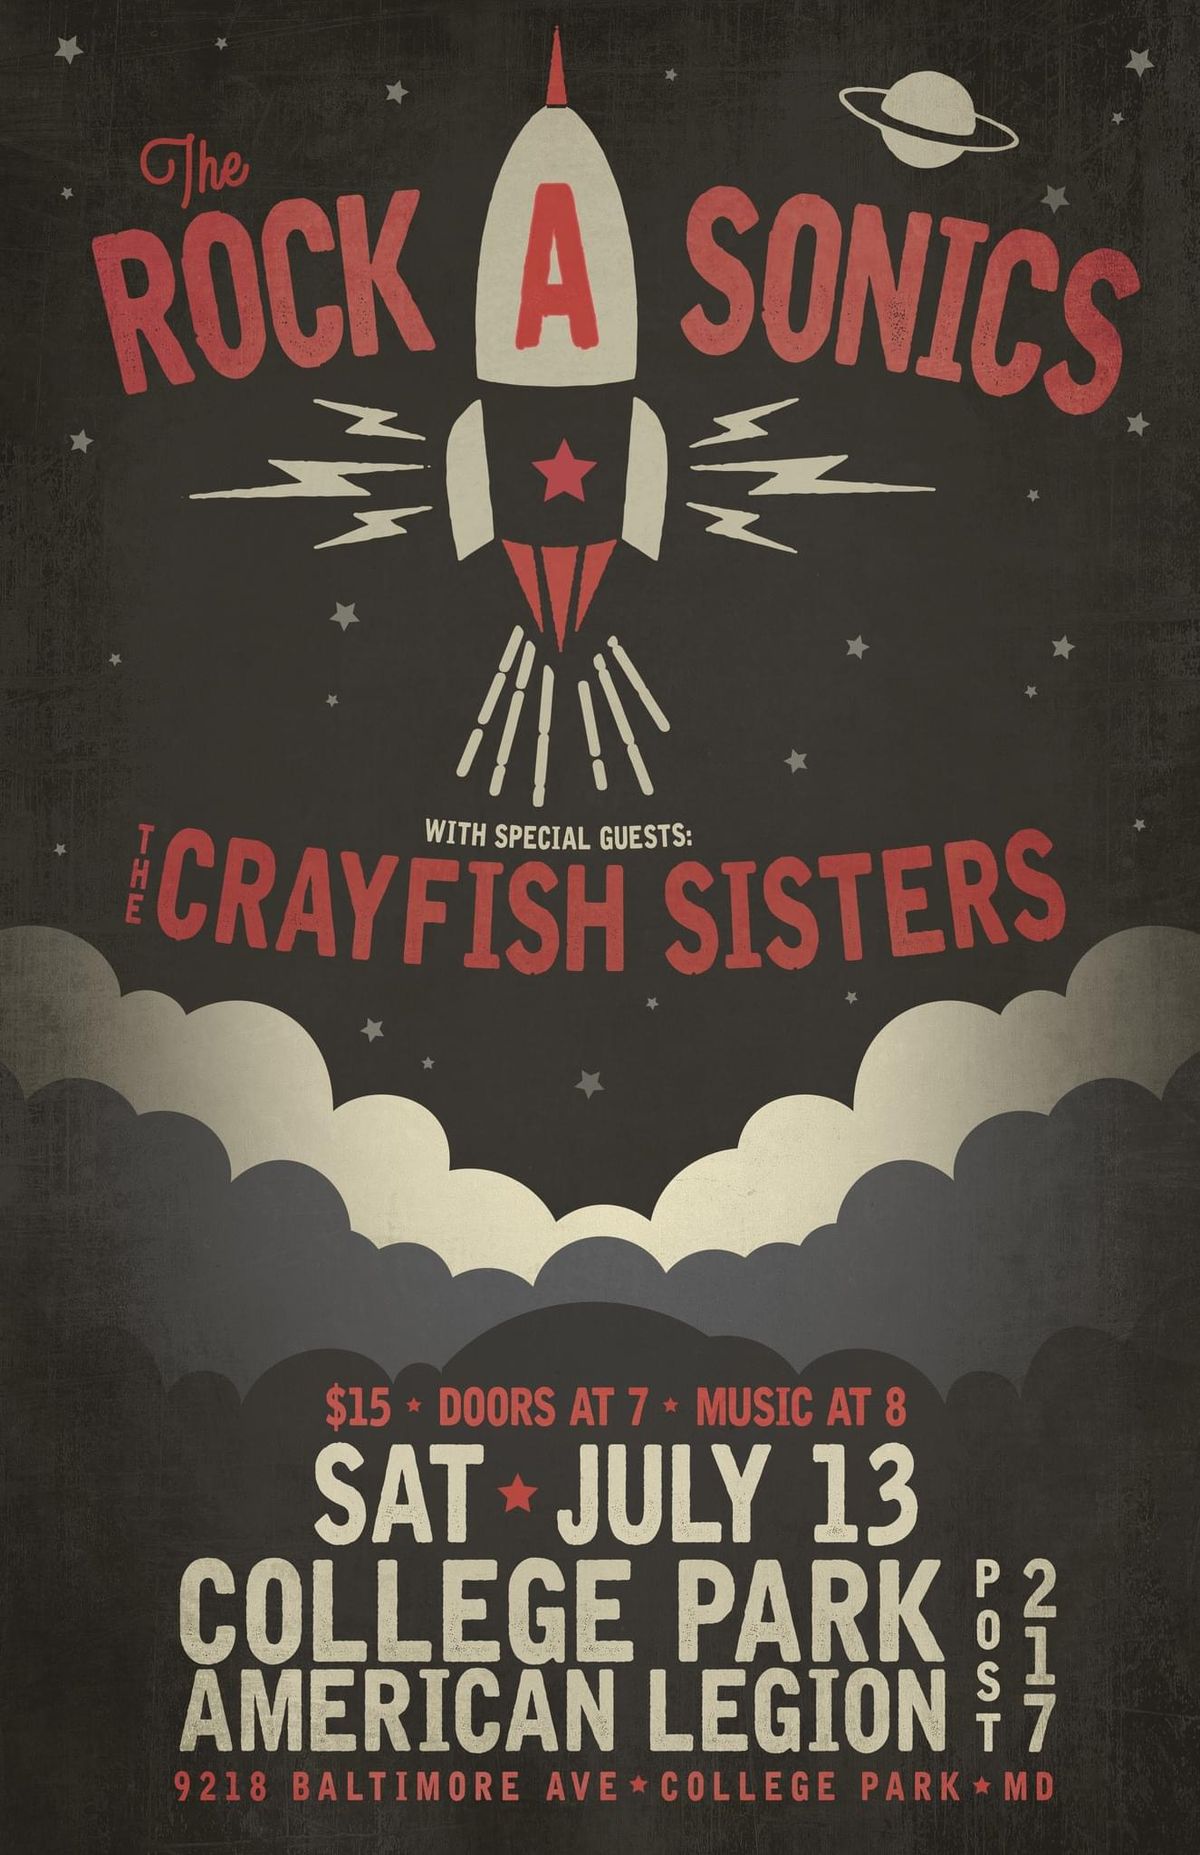 ROCK-A-SONICS with Special Guests THE CRAYFISH SISTERS